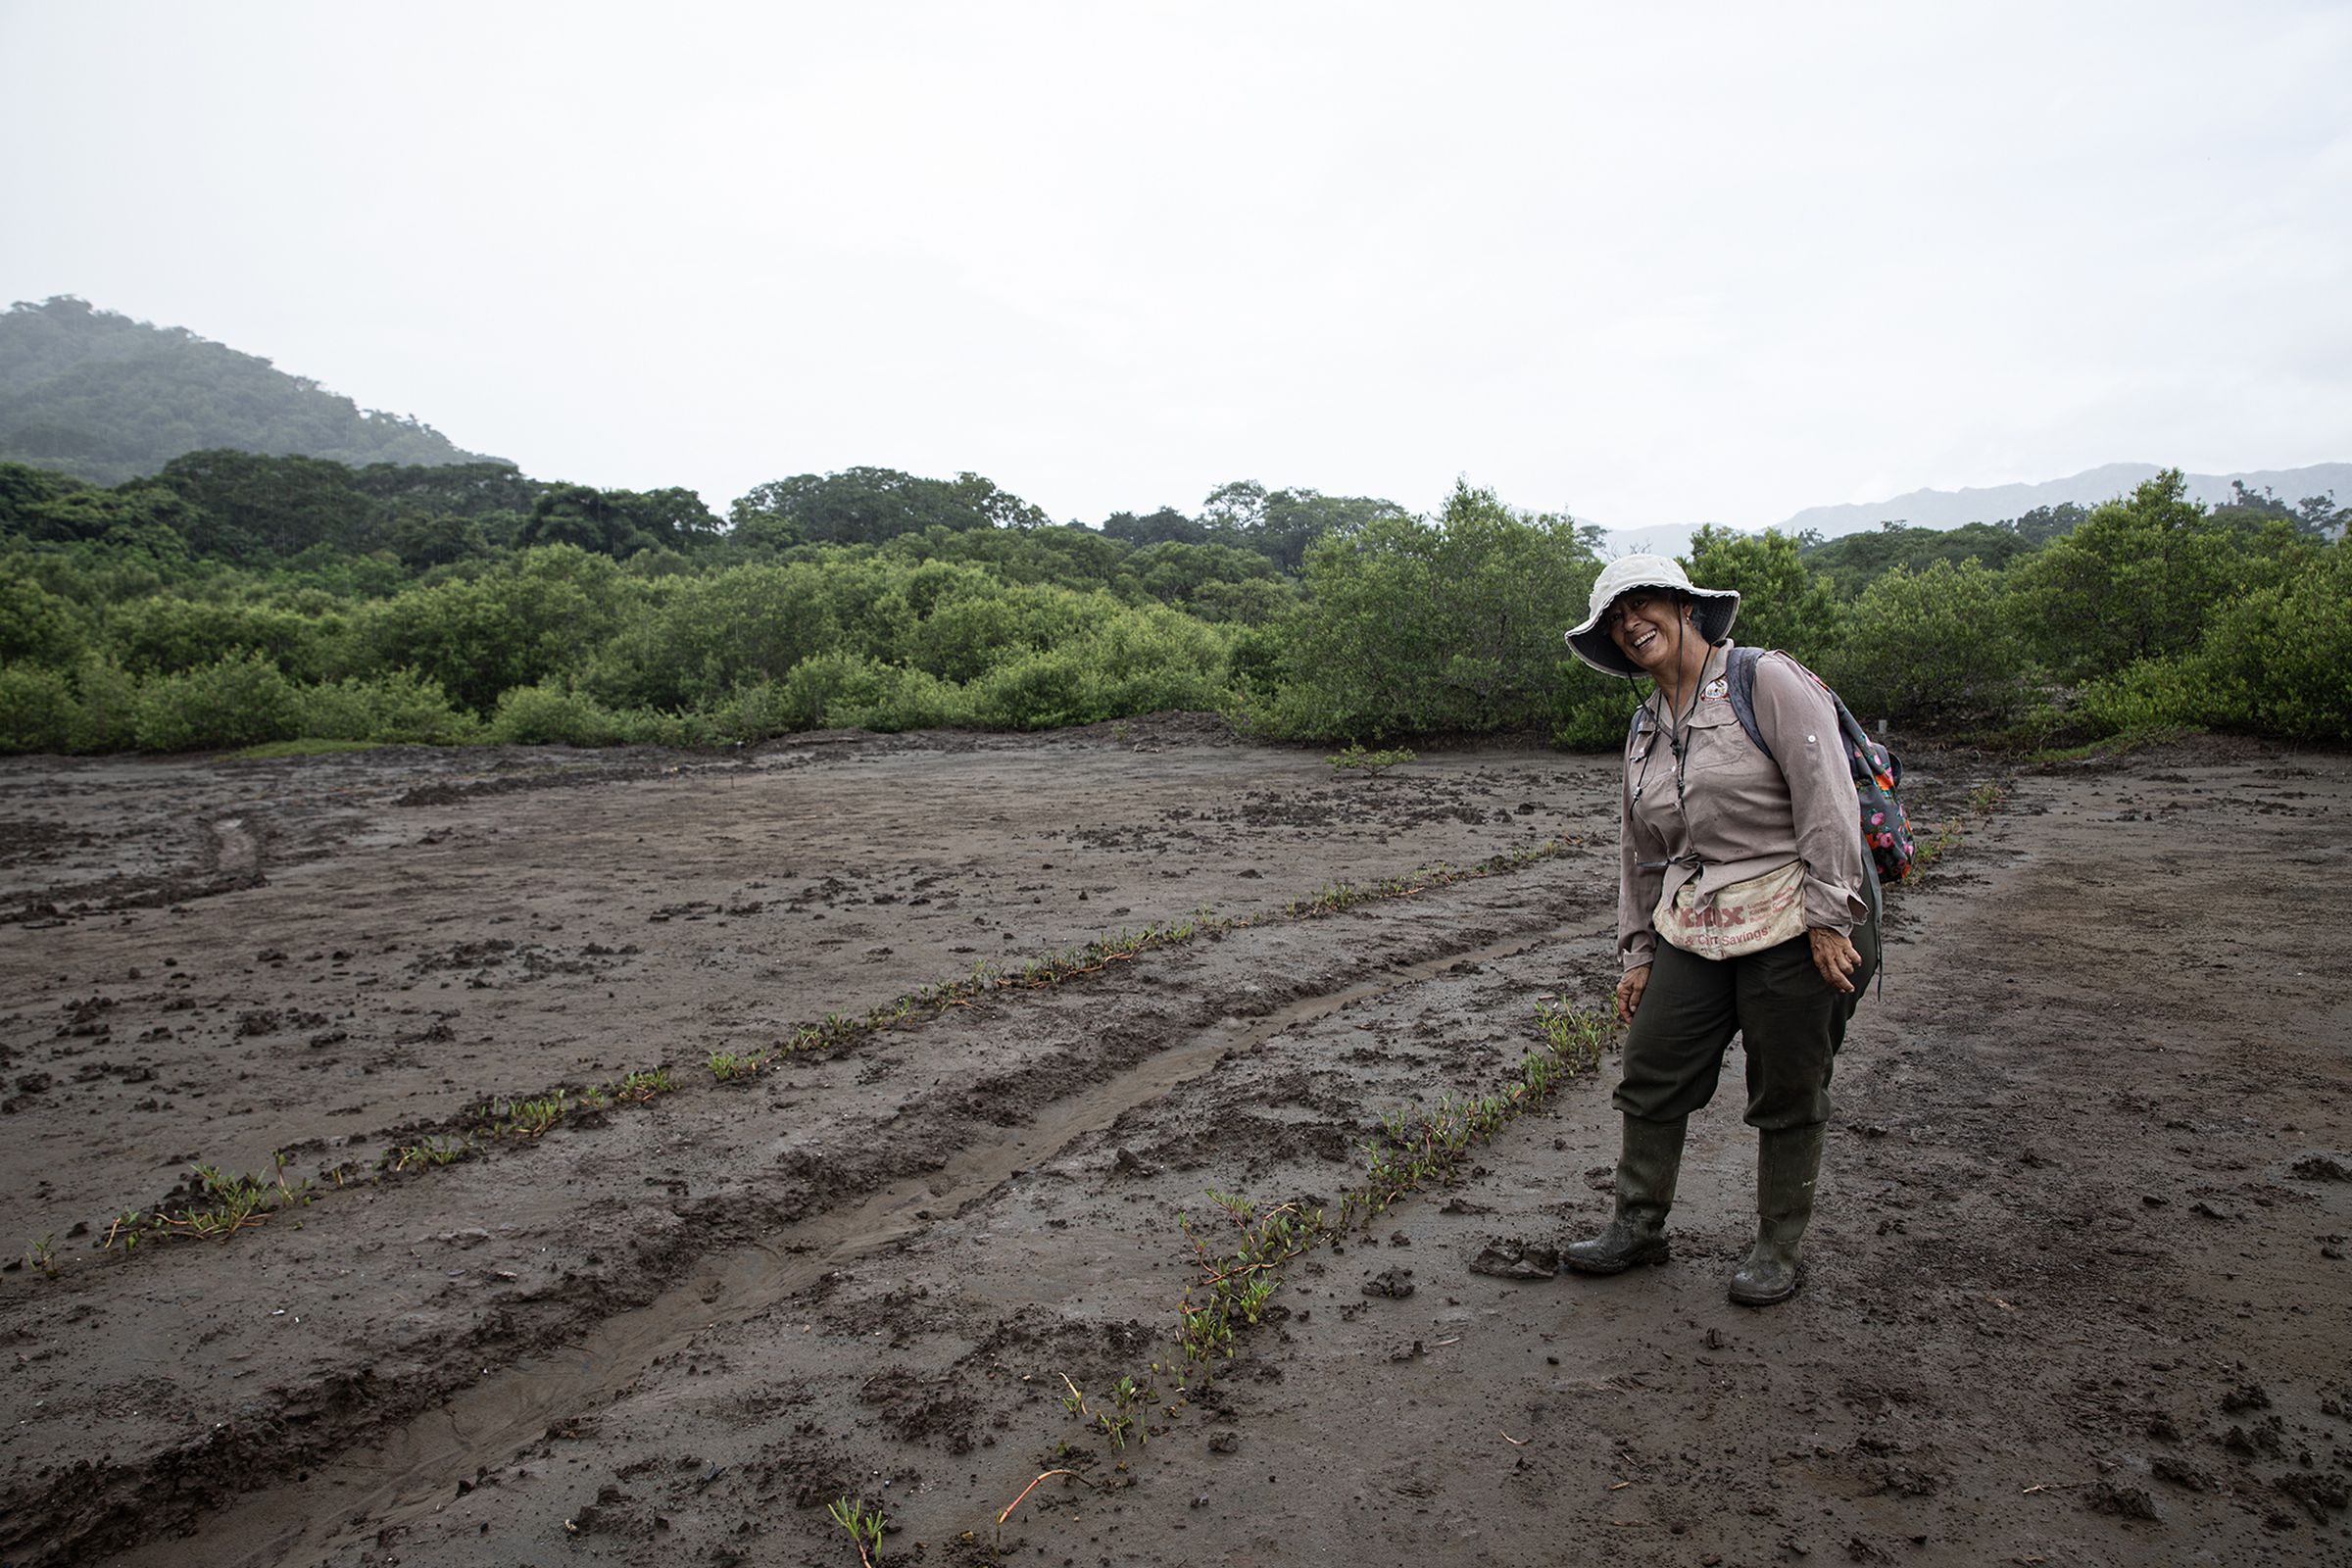 A woman stands next to seedlings planted next to a shallowly dug canal. Behind an open stretch of muddy land, you can see a mangrove forest.